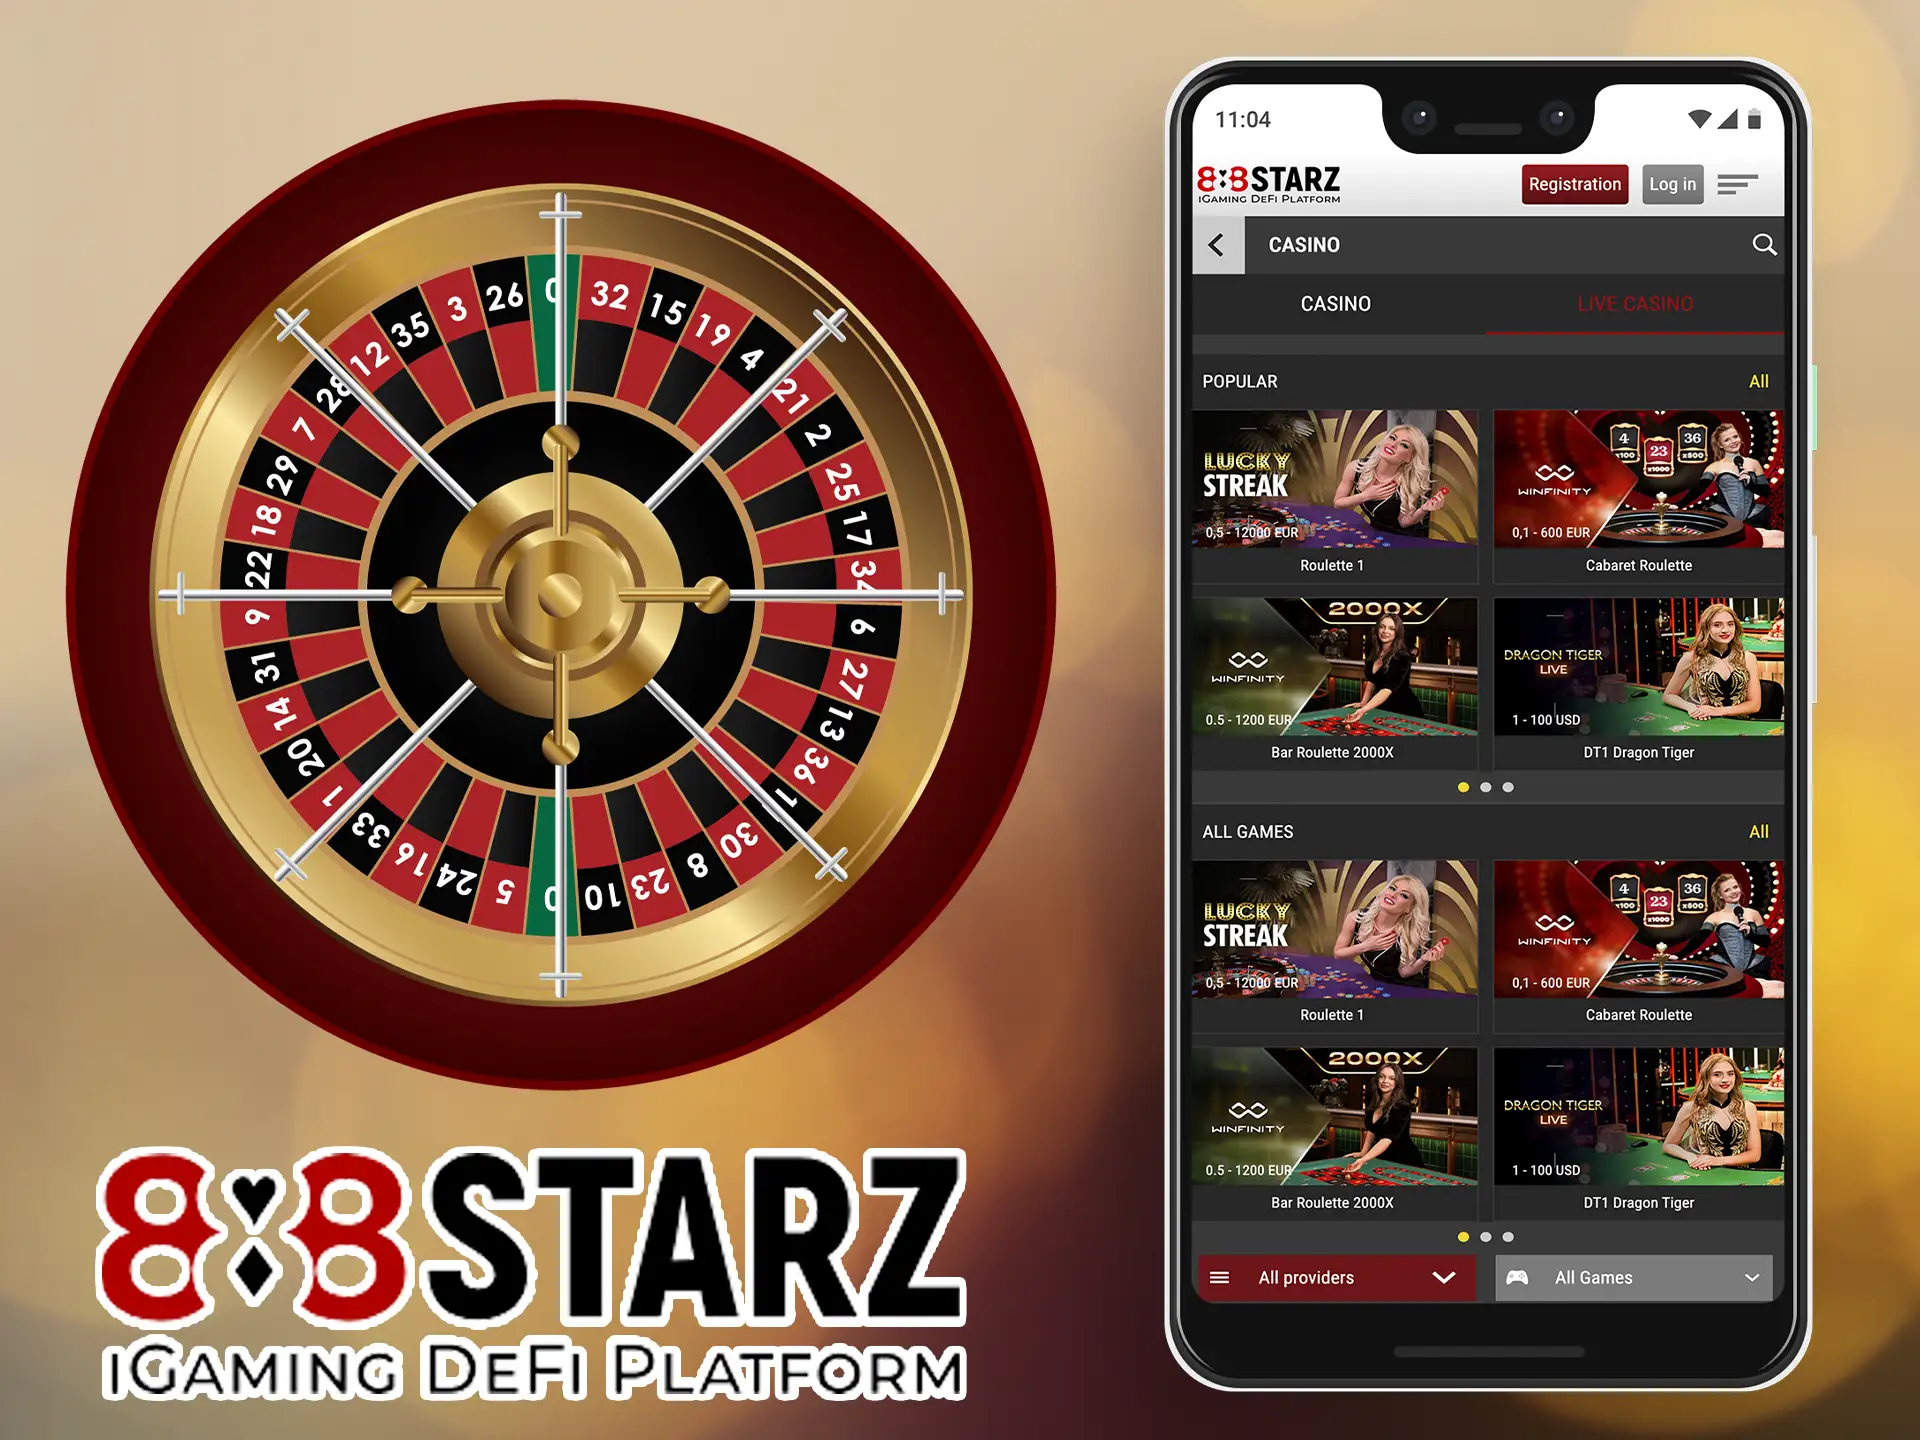 Fans of crypto will appreciate the abundance and convenience of funding Starz88 virtual account.